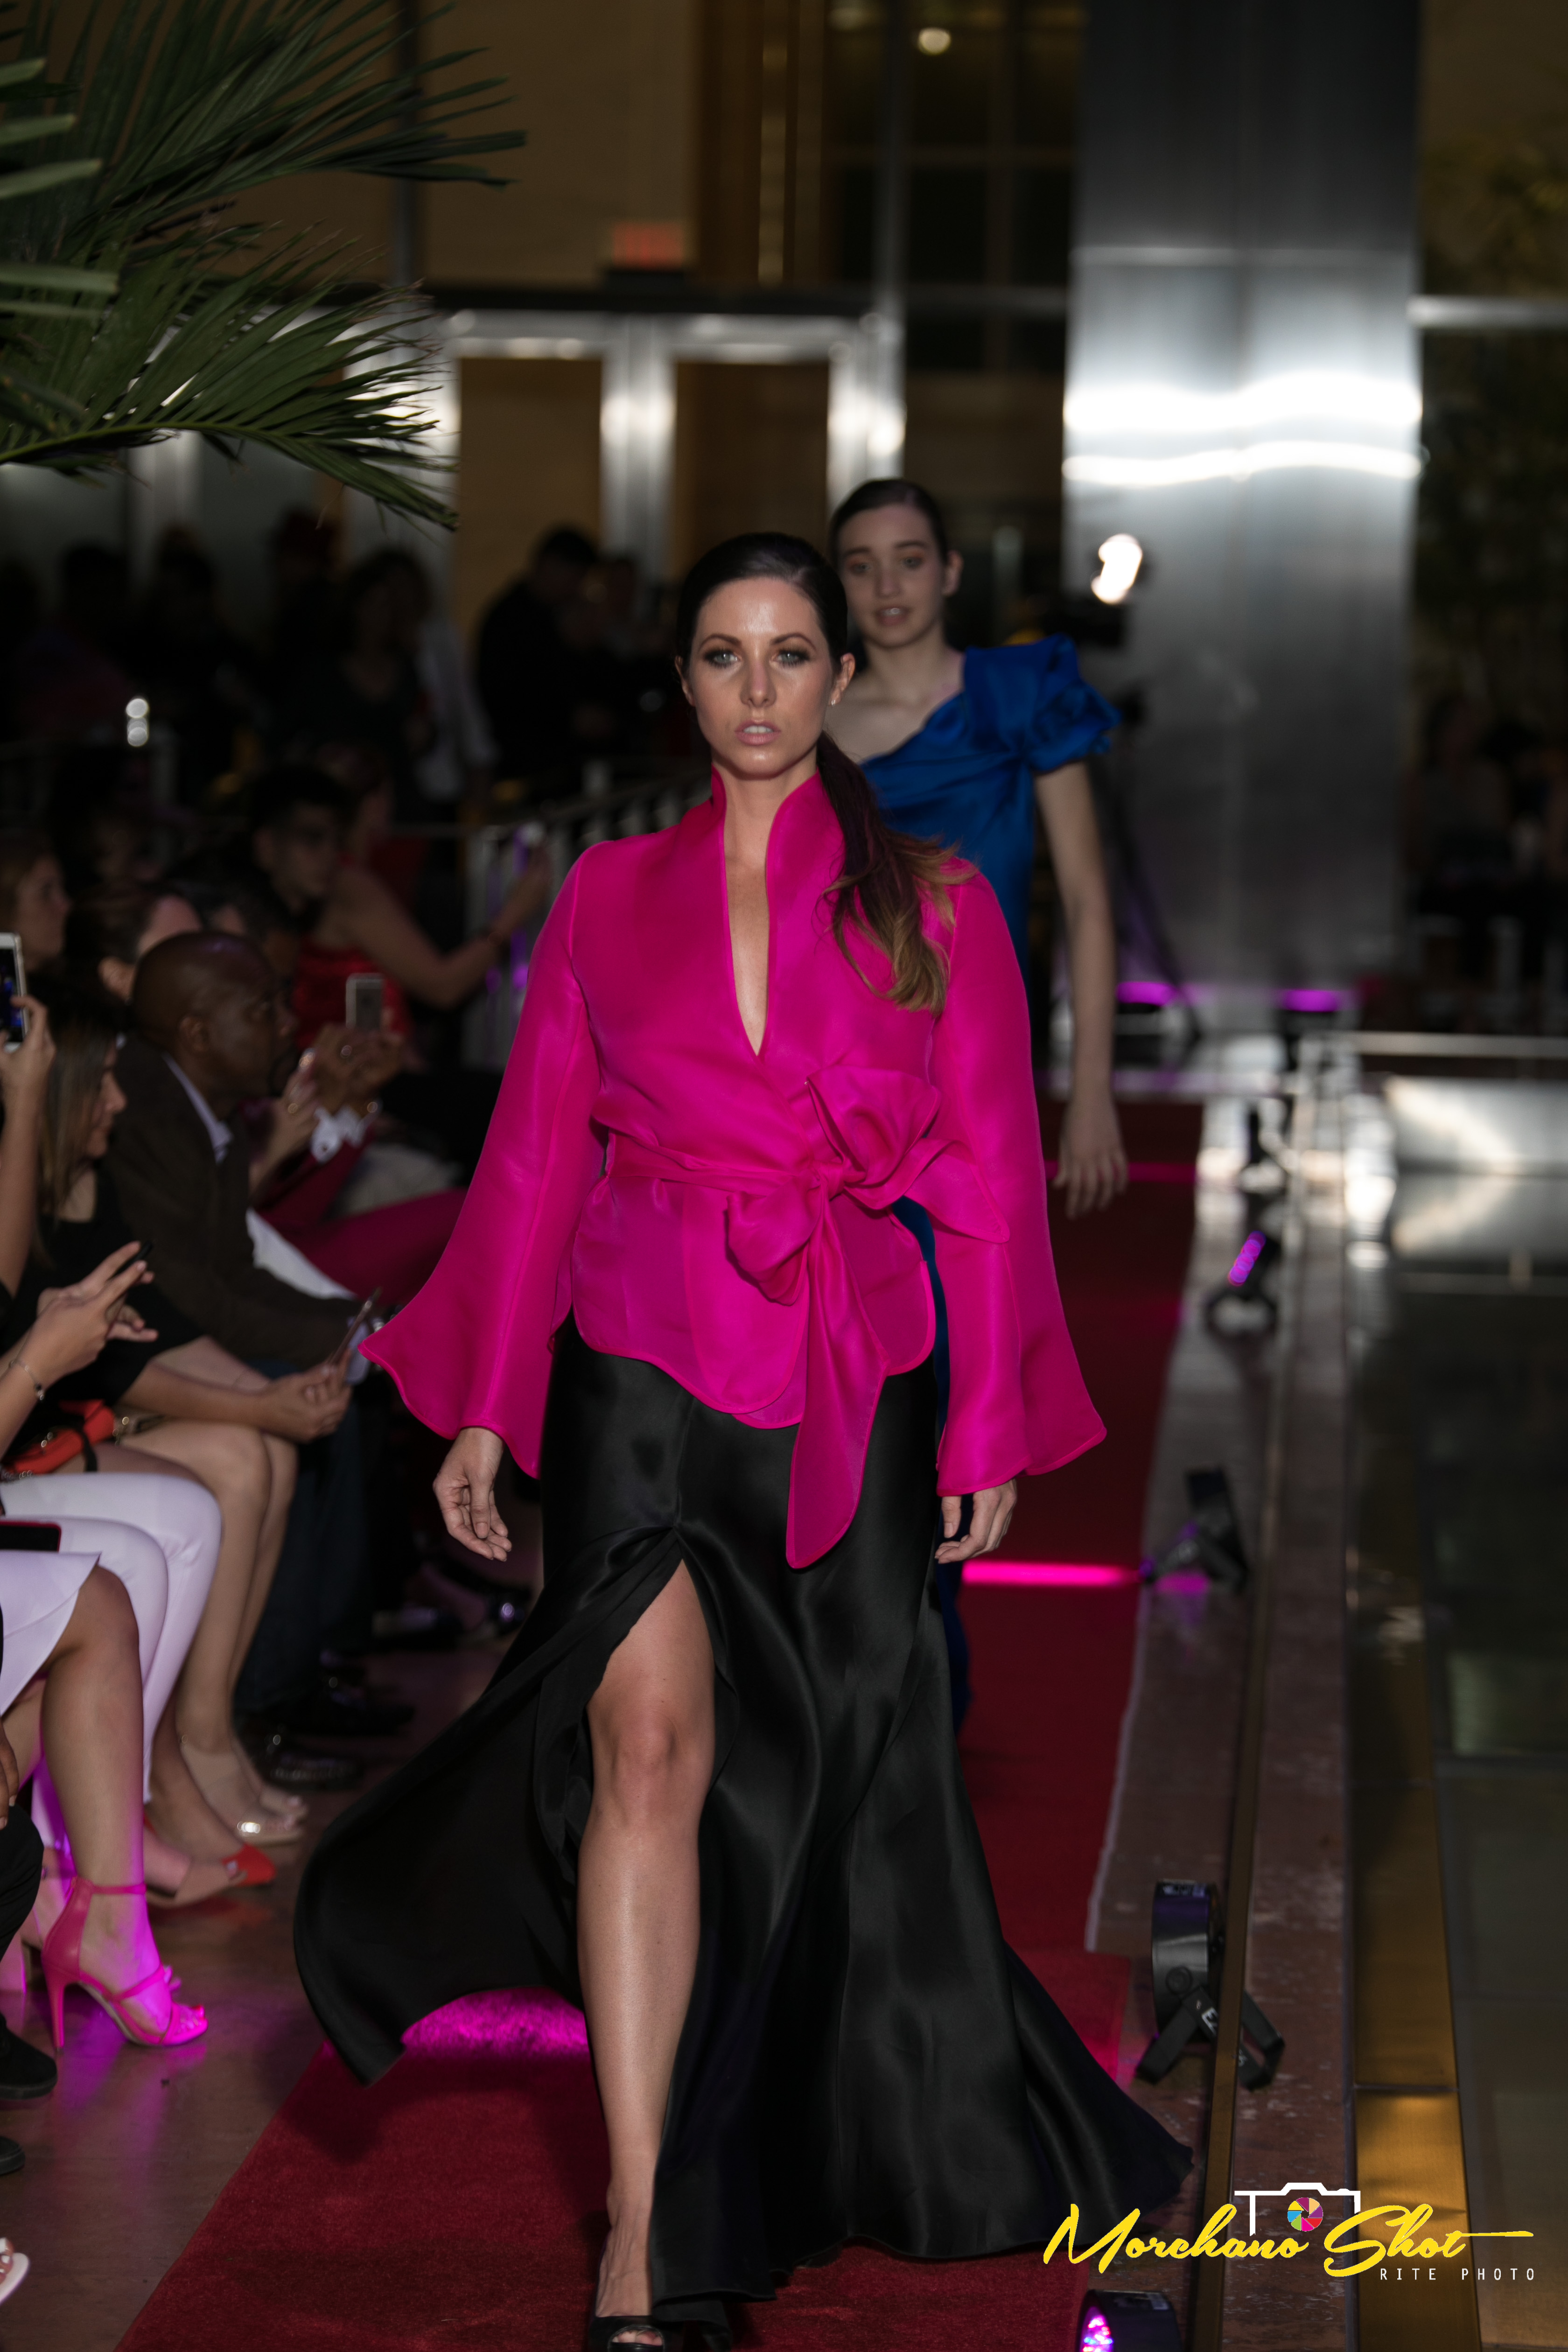 Models on the runway at Fashion Night on Brickell 2018